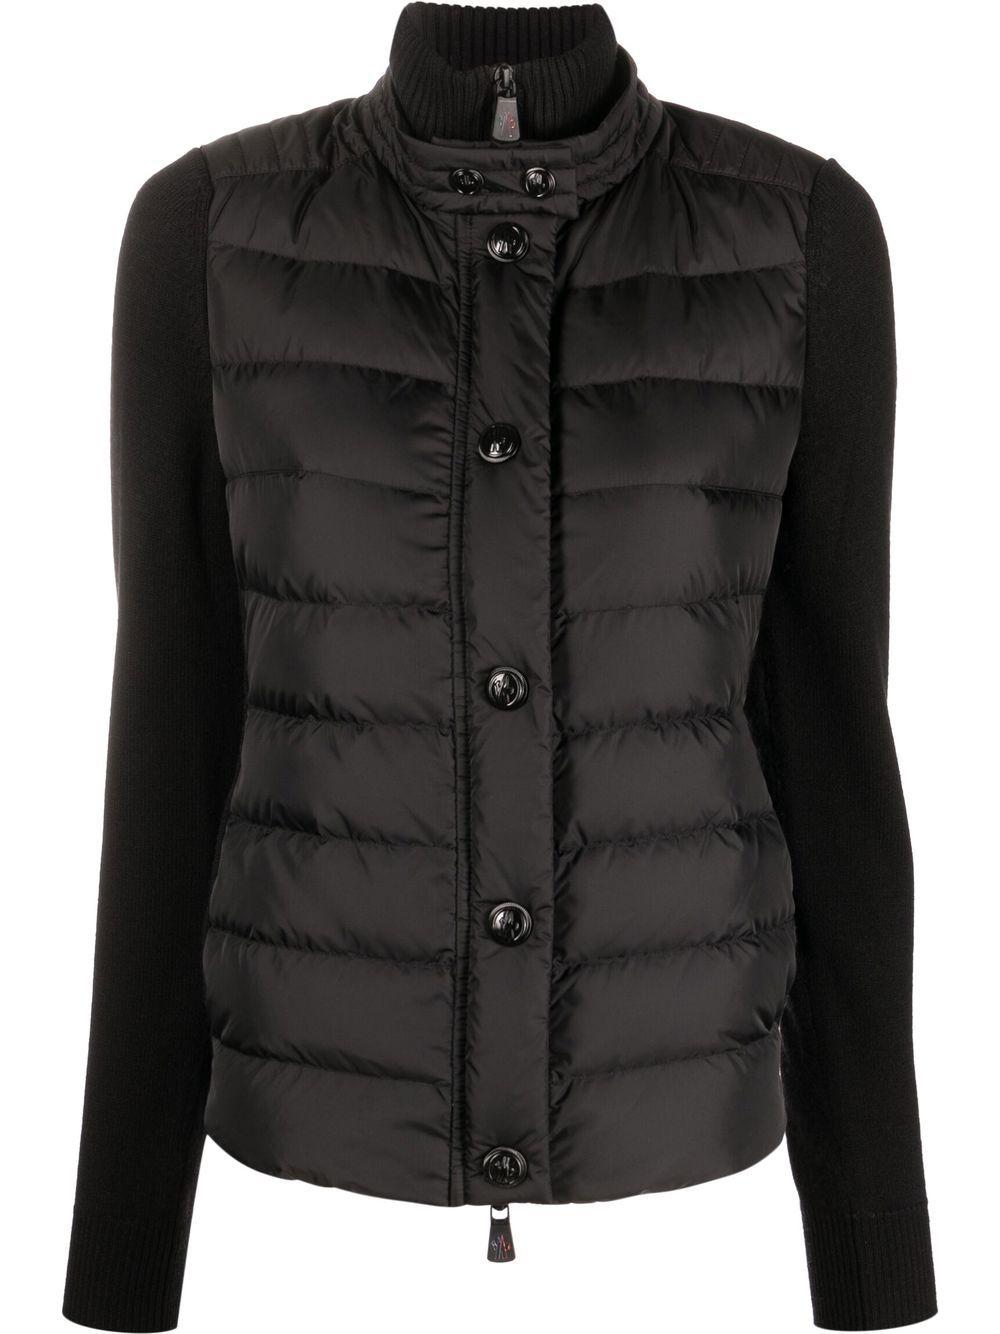 Moncler Padded Wool Cardigan in Black | Lyst